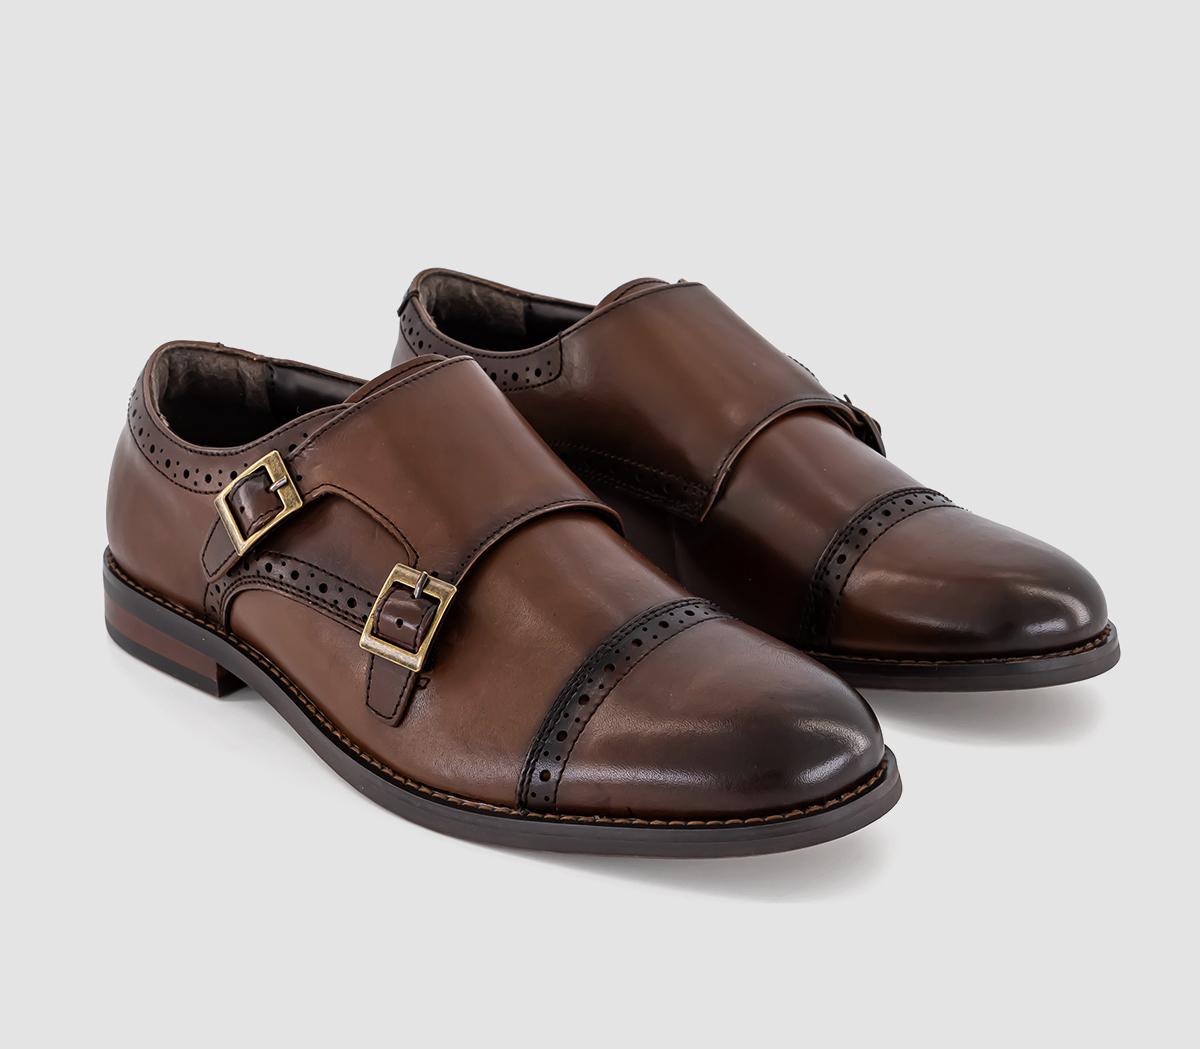 OFFICE Mens Myles Double Strap Monk Shoes Brown Leather, 8